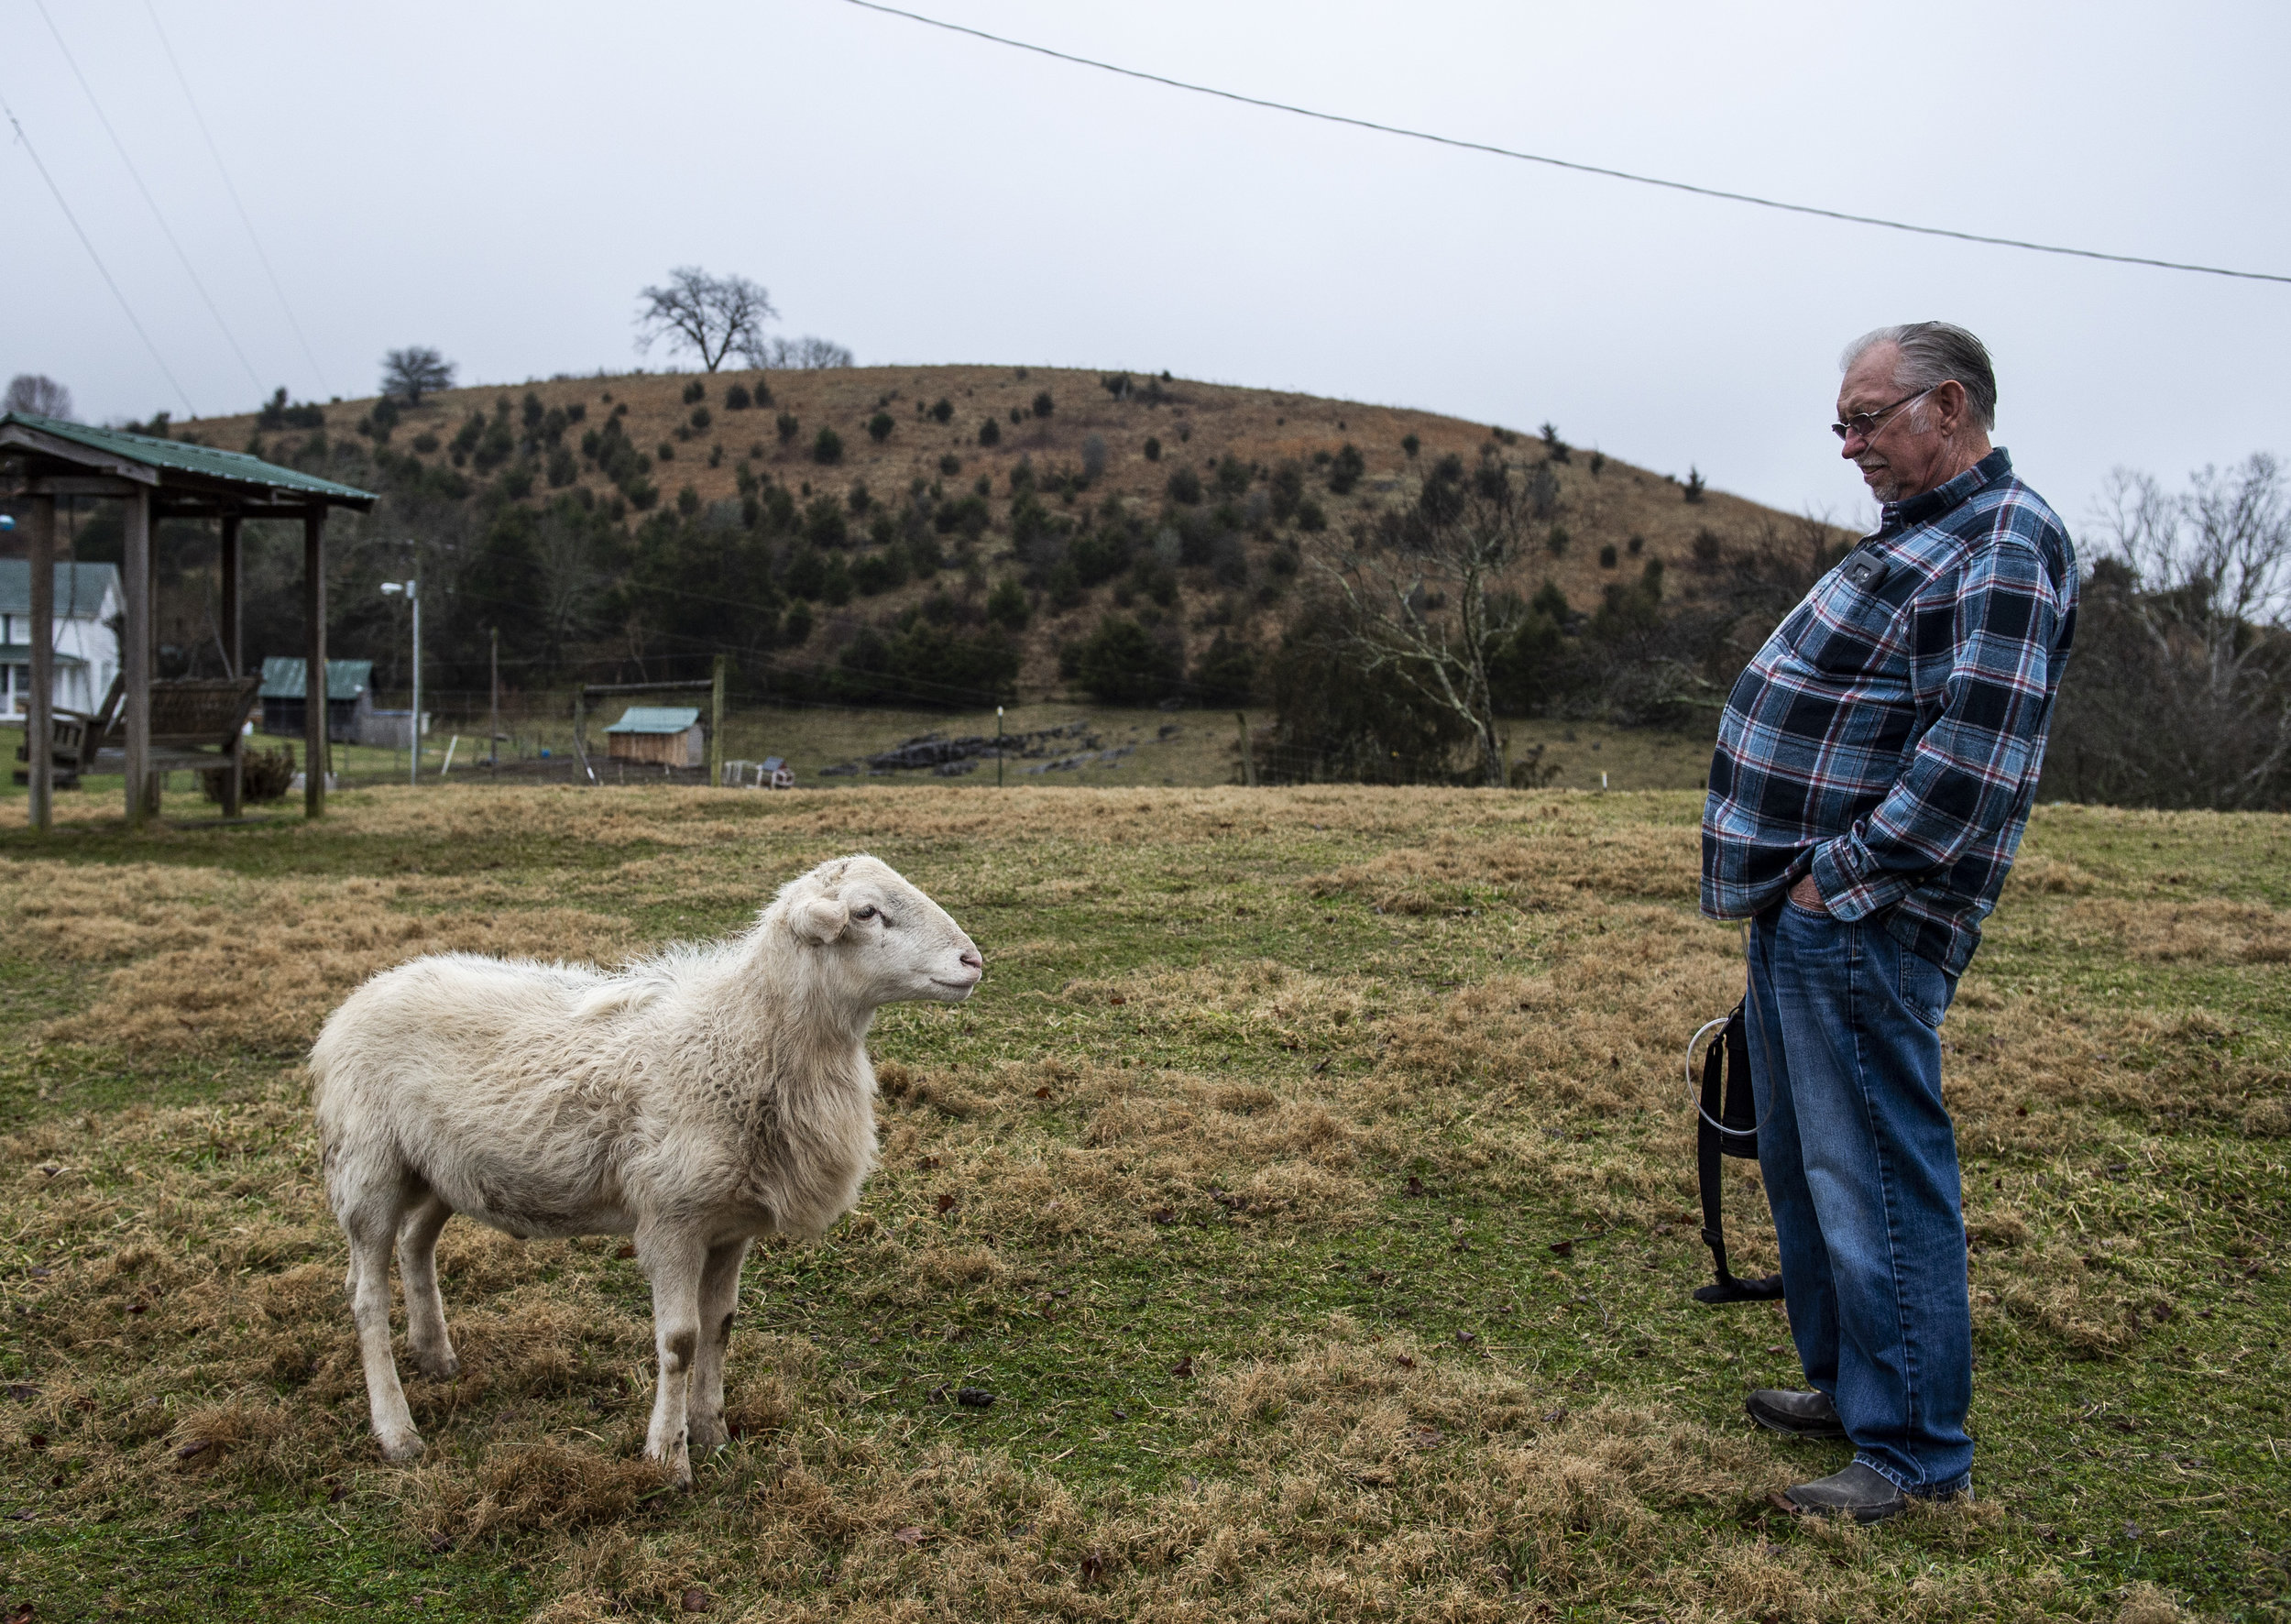  Paul Kinder and one his rams share a moment on his homestead on the outskirts of Honaker, Virginia on Friday, January 18. Paul, who worked in the mines since he was a teenager, lives with Black Lung Disease. While it limits his mobility, he makes it